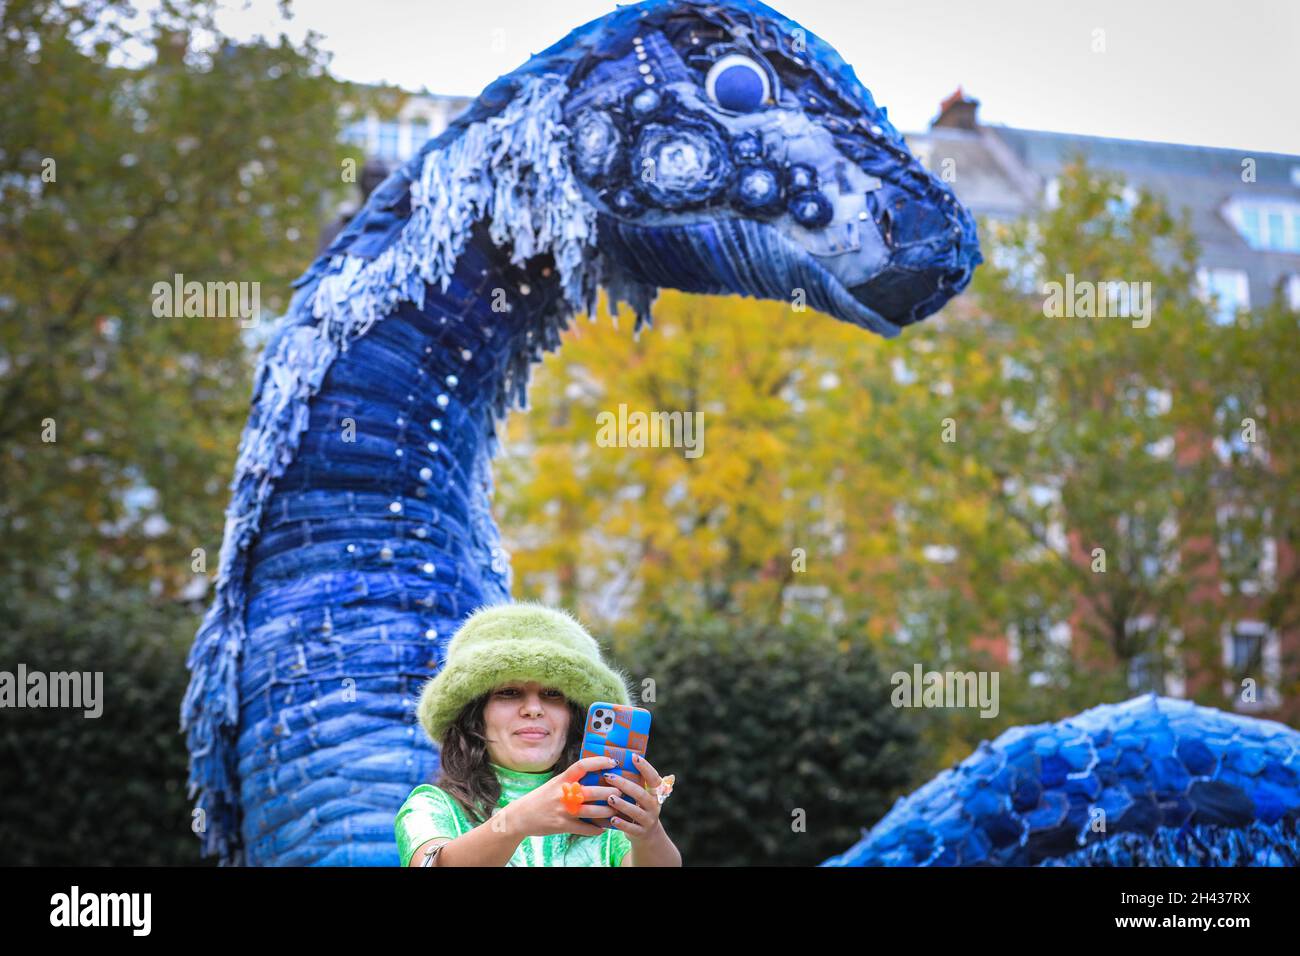 Grosvenor Square, London, UK. 31st Oct, 2021. People look at and pose with  Messy the COP NESS Monster. Messy is made entirely out of recycled jeans  and other sustainable materials, and will